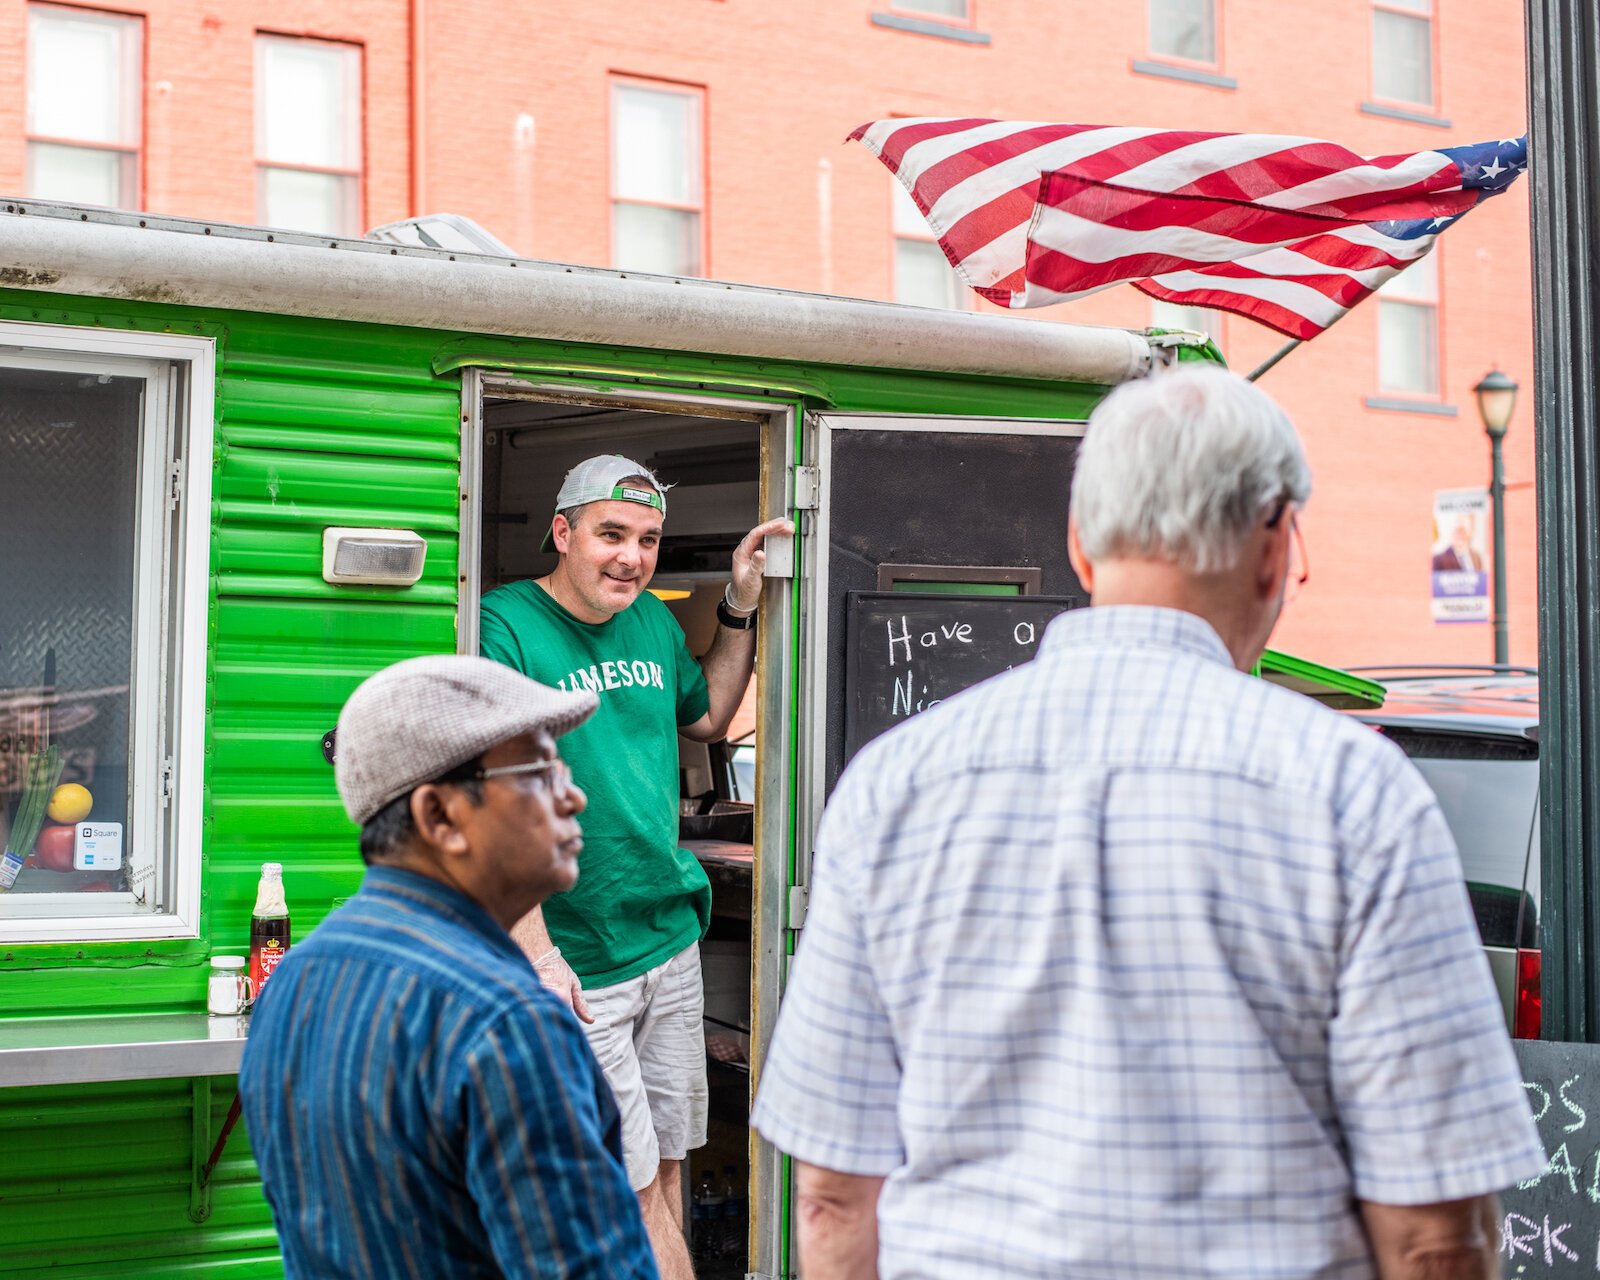 Emmett McIlvenny, owner of Emmett’s Paddy Wagon, talks with customers outside his food truck.